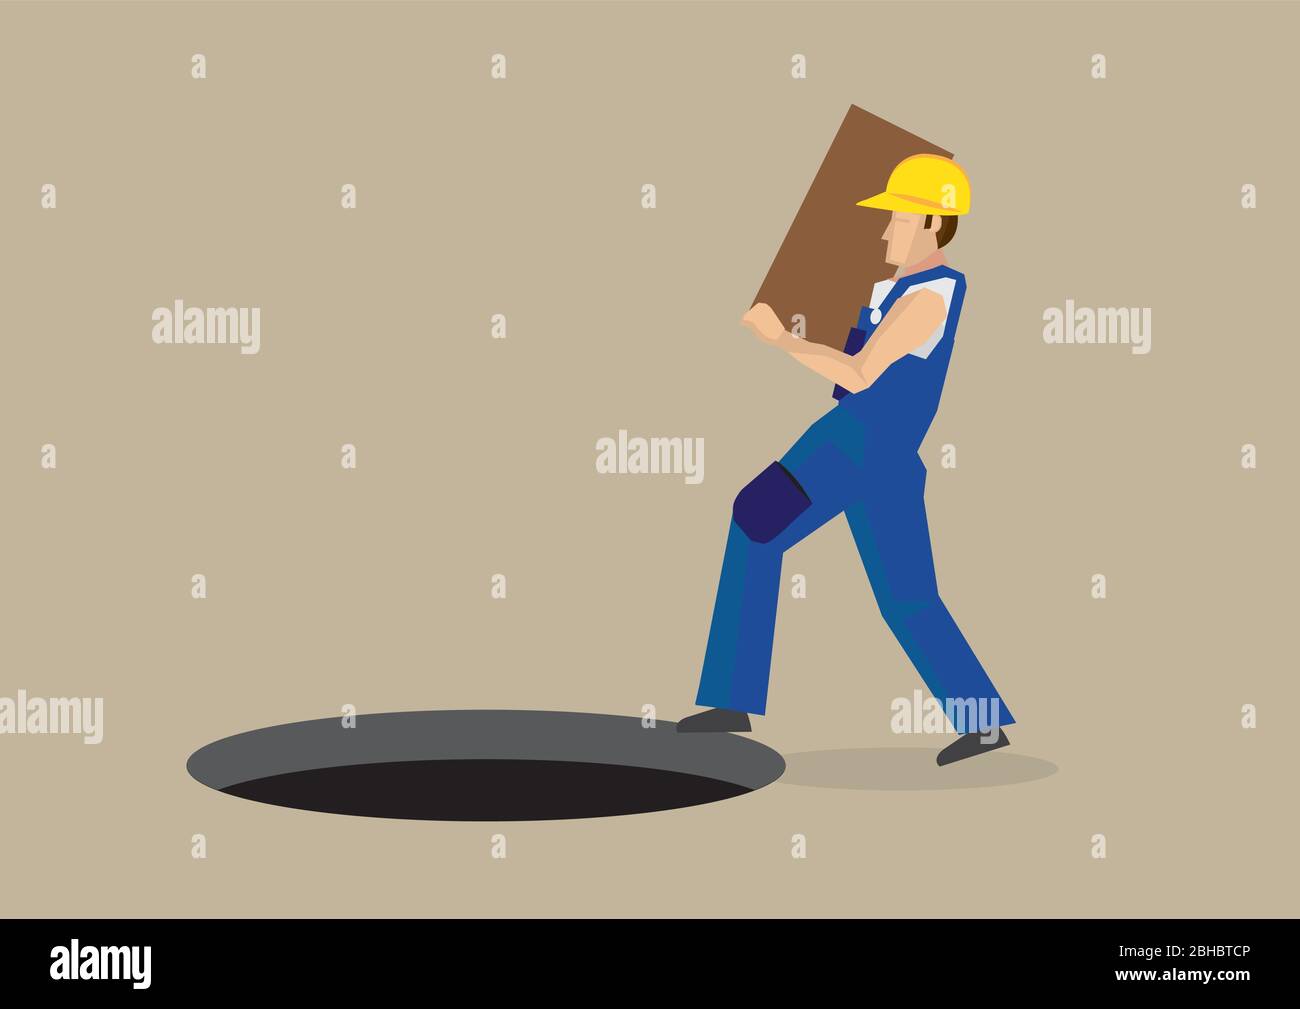 Worker carrying a box walking right into a exposed manhole on the ground in front of him. Vector illustration for workplace hazards concept isolated o Stock Vector